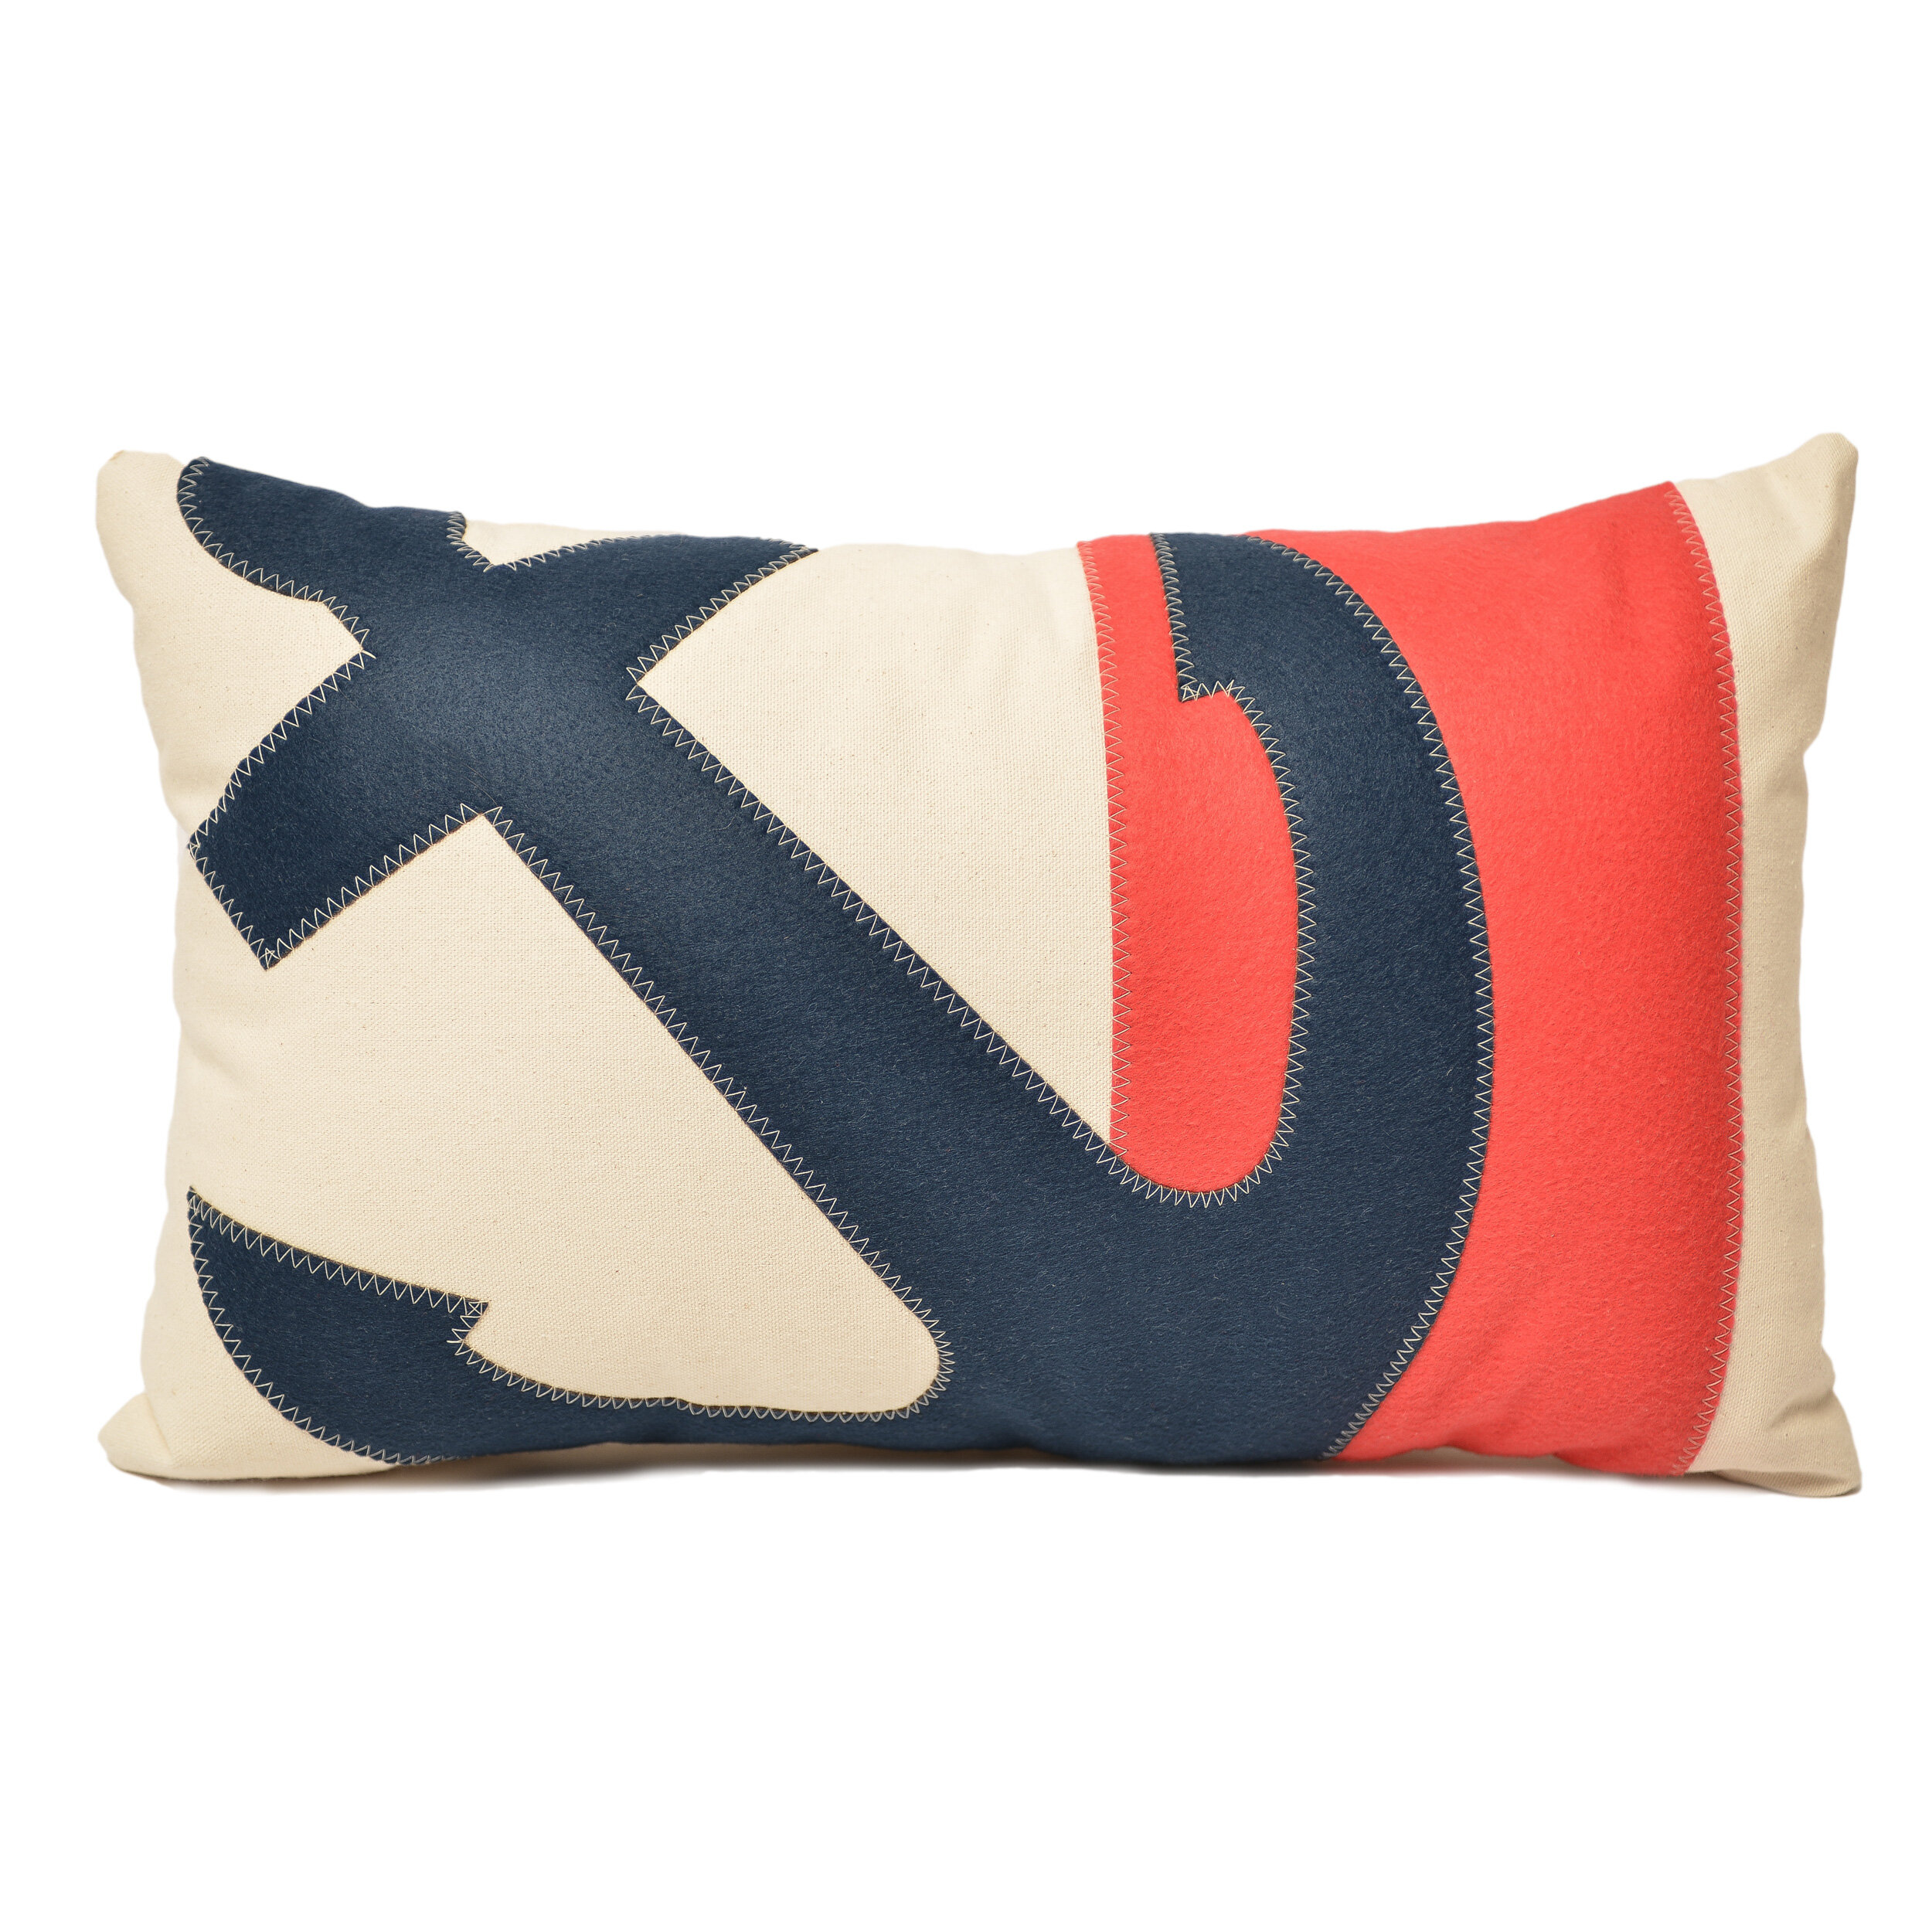 Lumbar Support Pillow, Cream, Navy Blue, Red & Coral Throw Pillows for Bed,  Large Couch Pillows Set, or Outdoor Lumbar Southwestern Decor 